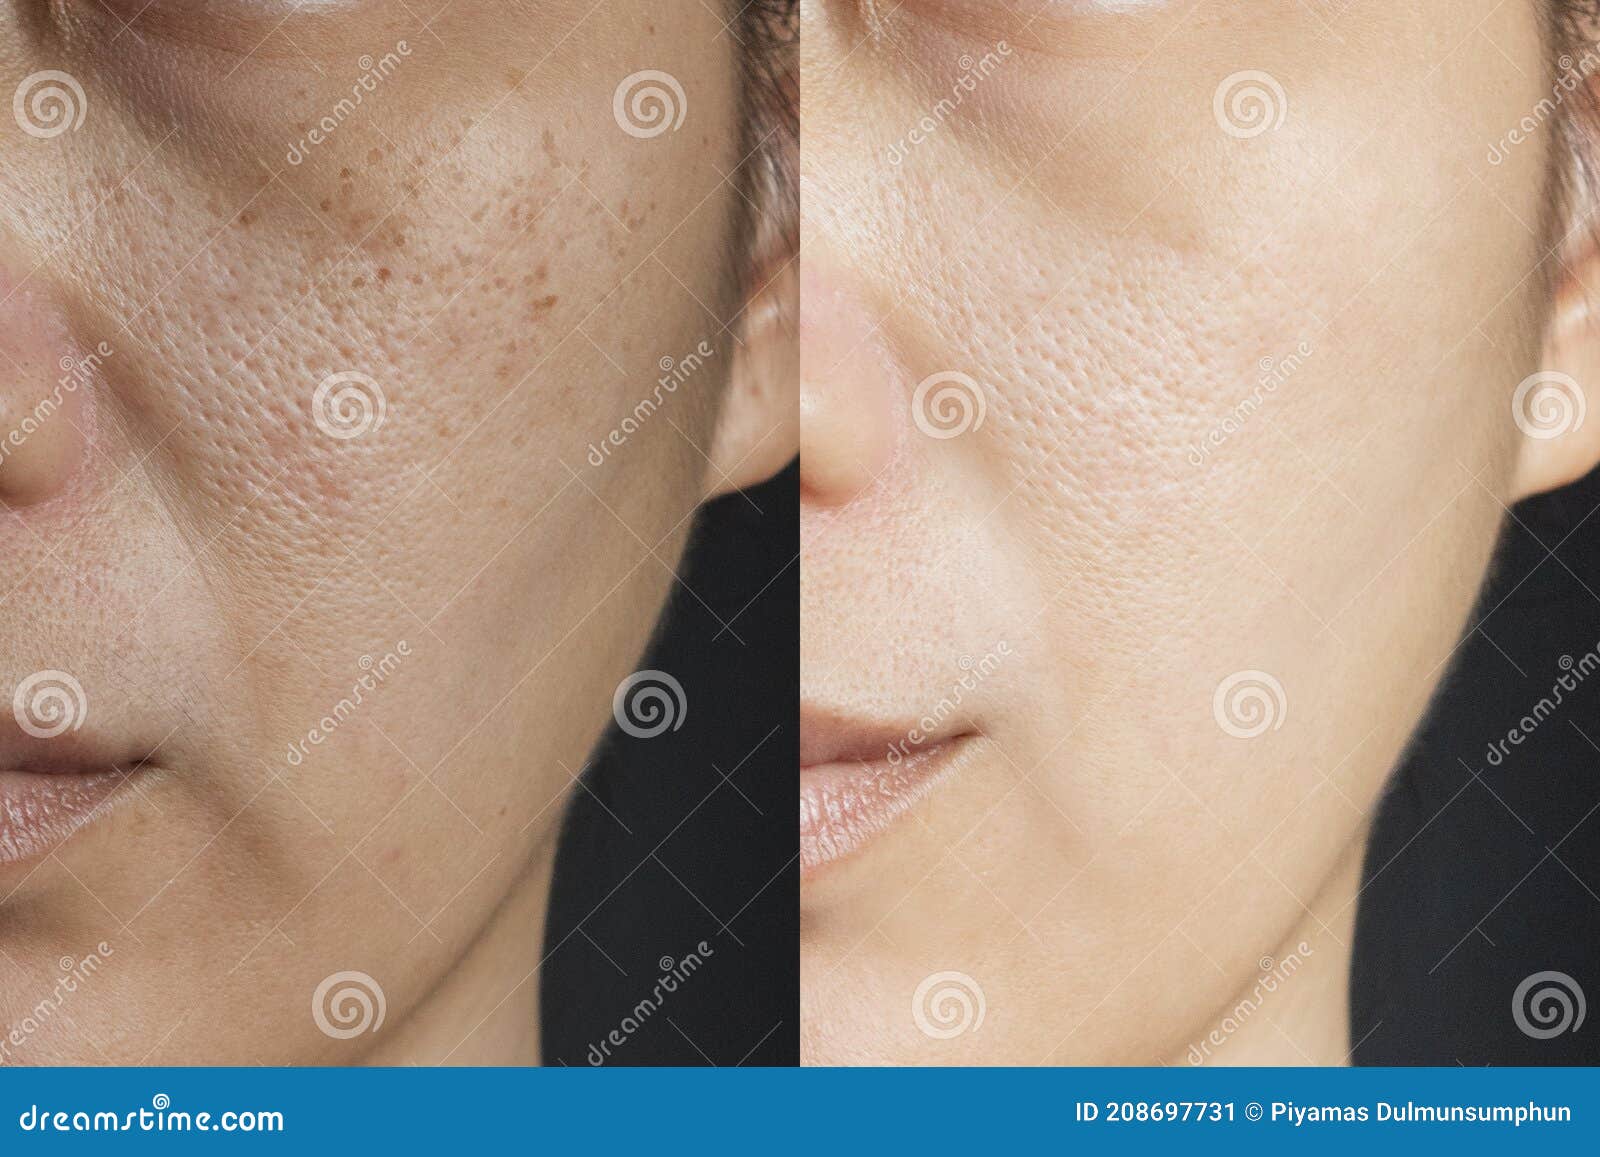 two pictures compare effect before and after treatment. skin with problems of freckles , pore , dull skin and wrinkles